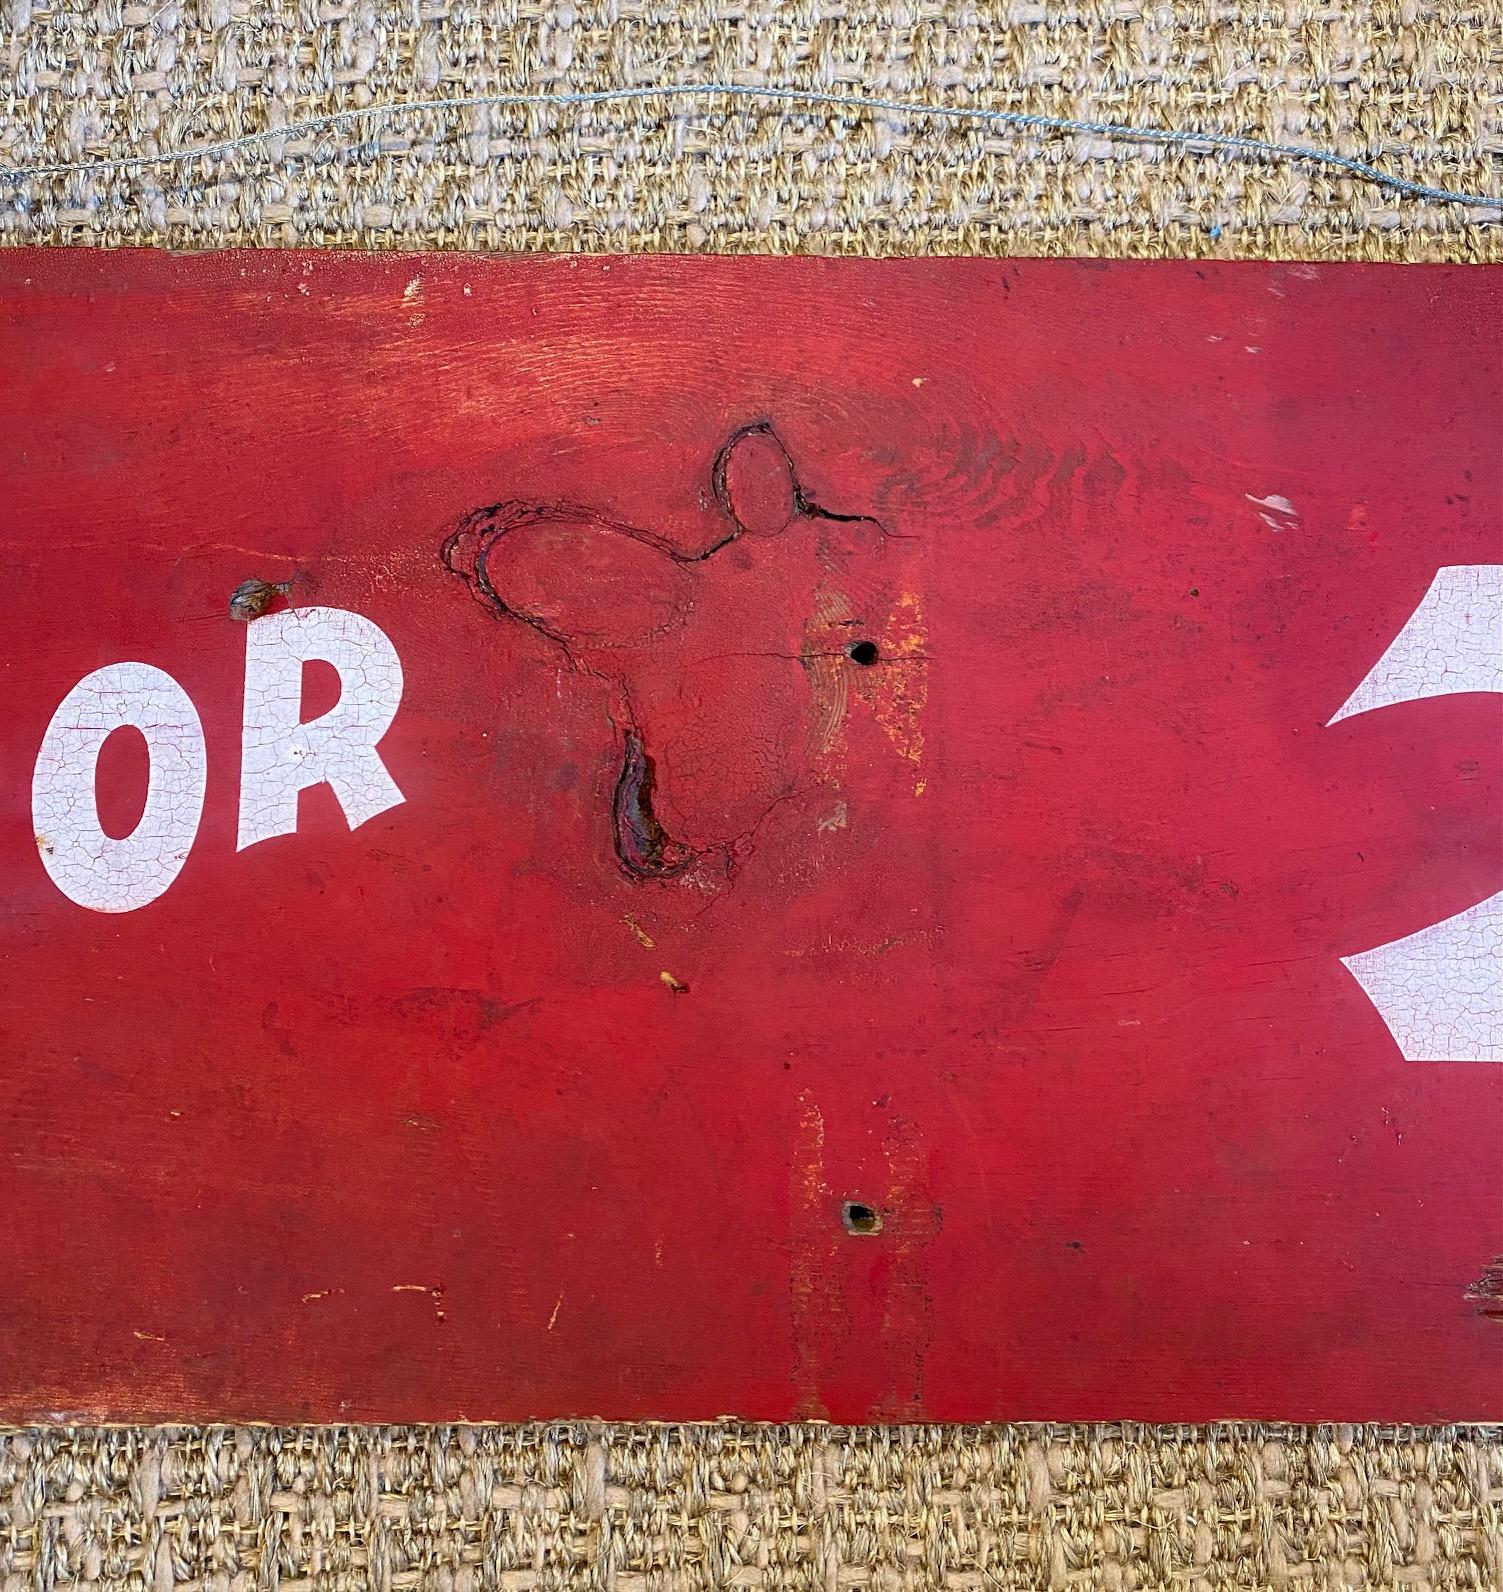 Antique Folk Art hand painted double-sided wooden trade sign dating from the early 20th Century... 1920s? 1930s? A wonderful whimsical sign most likely from a farm stand: they are selling something for the great bargain of 15 for 25 cents, but